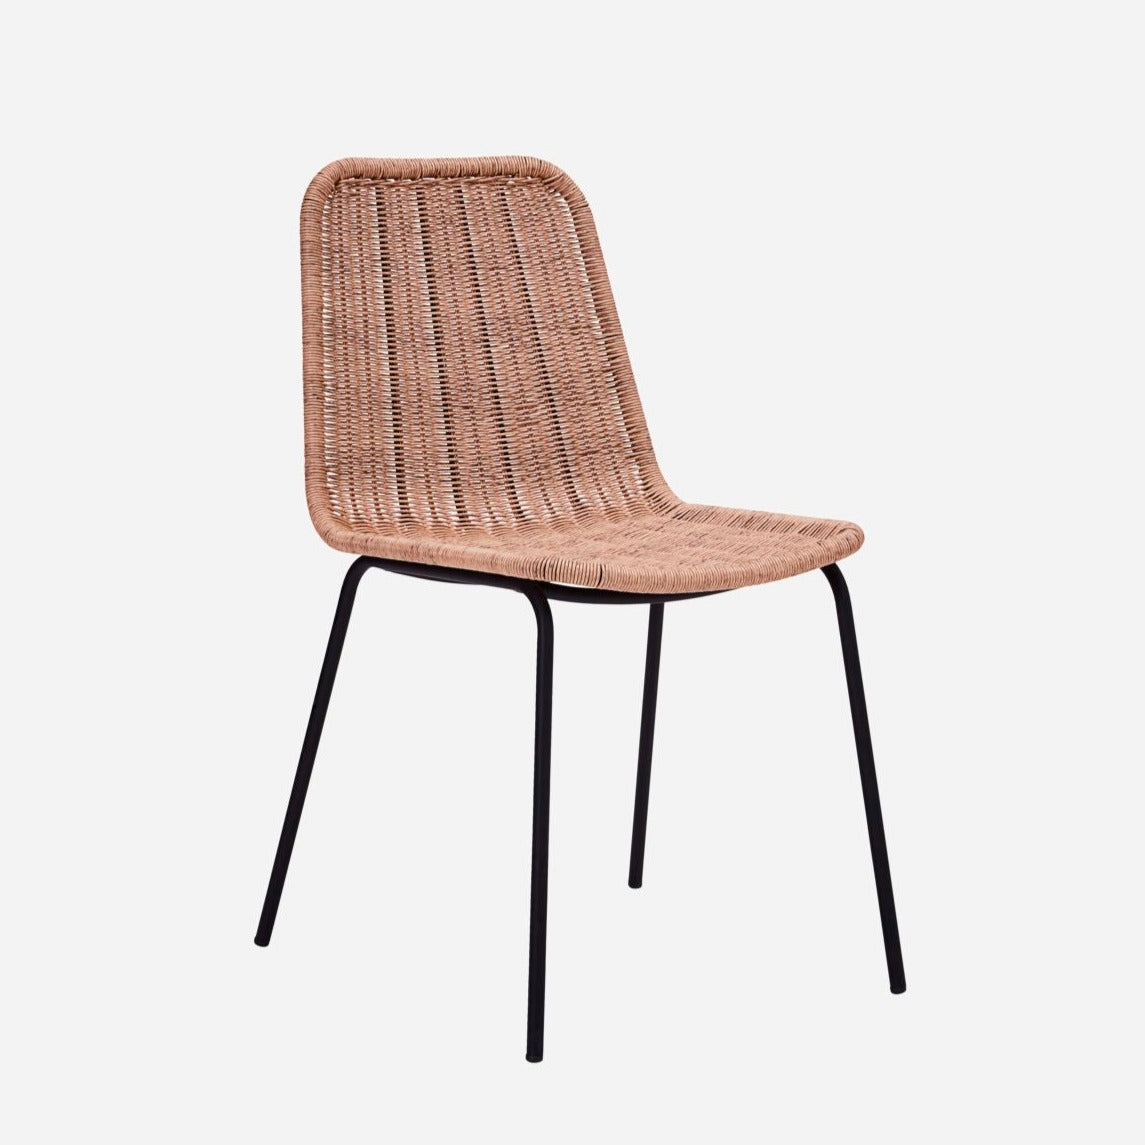 Outdoor chair Hapur natural